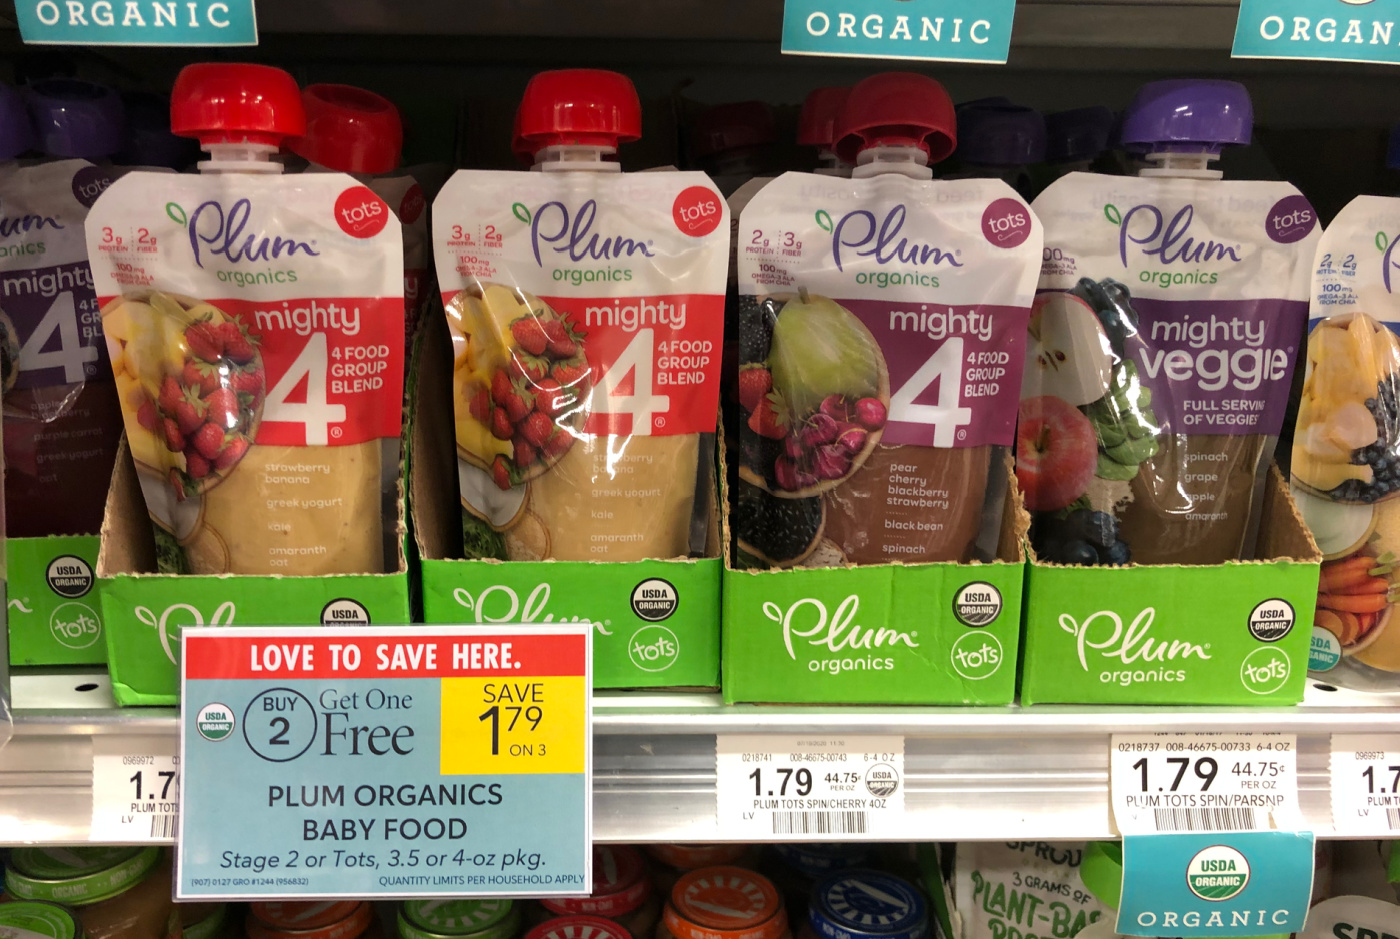 Fantastic Deal On Plum Organics® Baby Food & Snacks Available NOW At Publix! on I Heart Publix